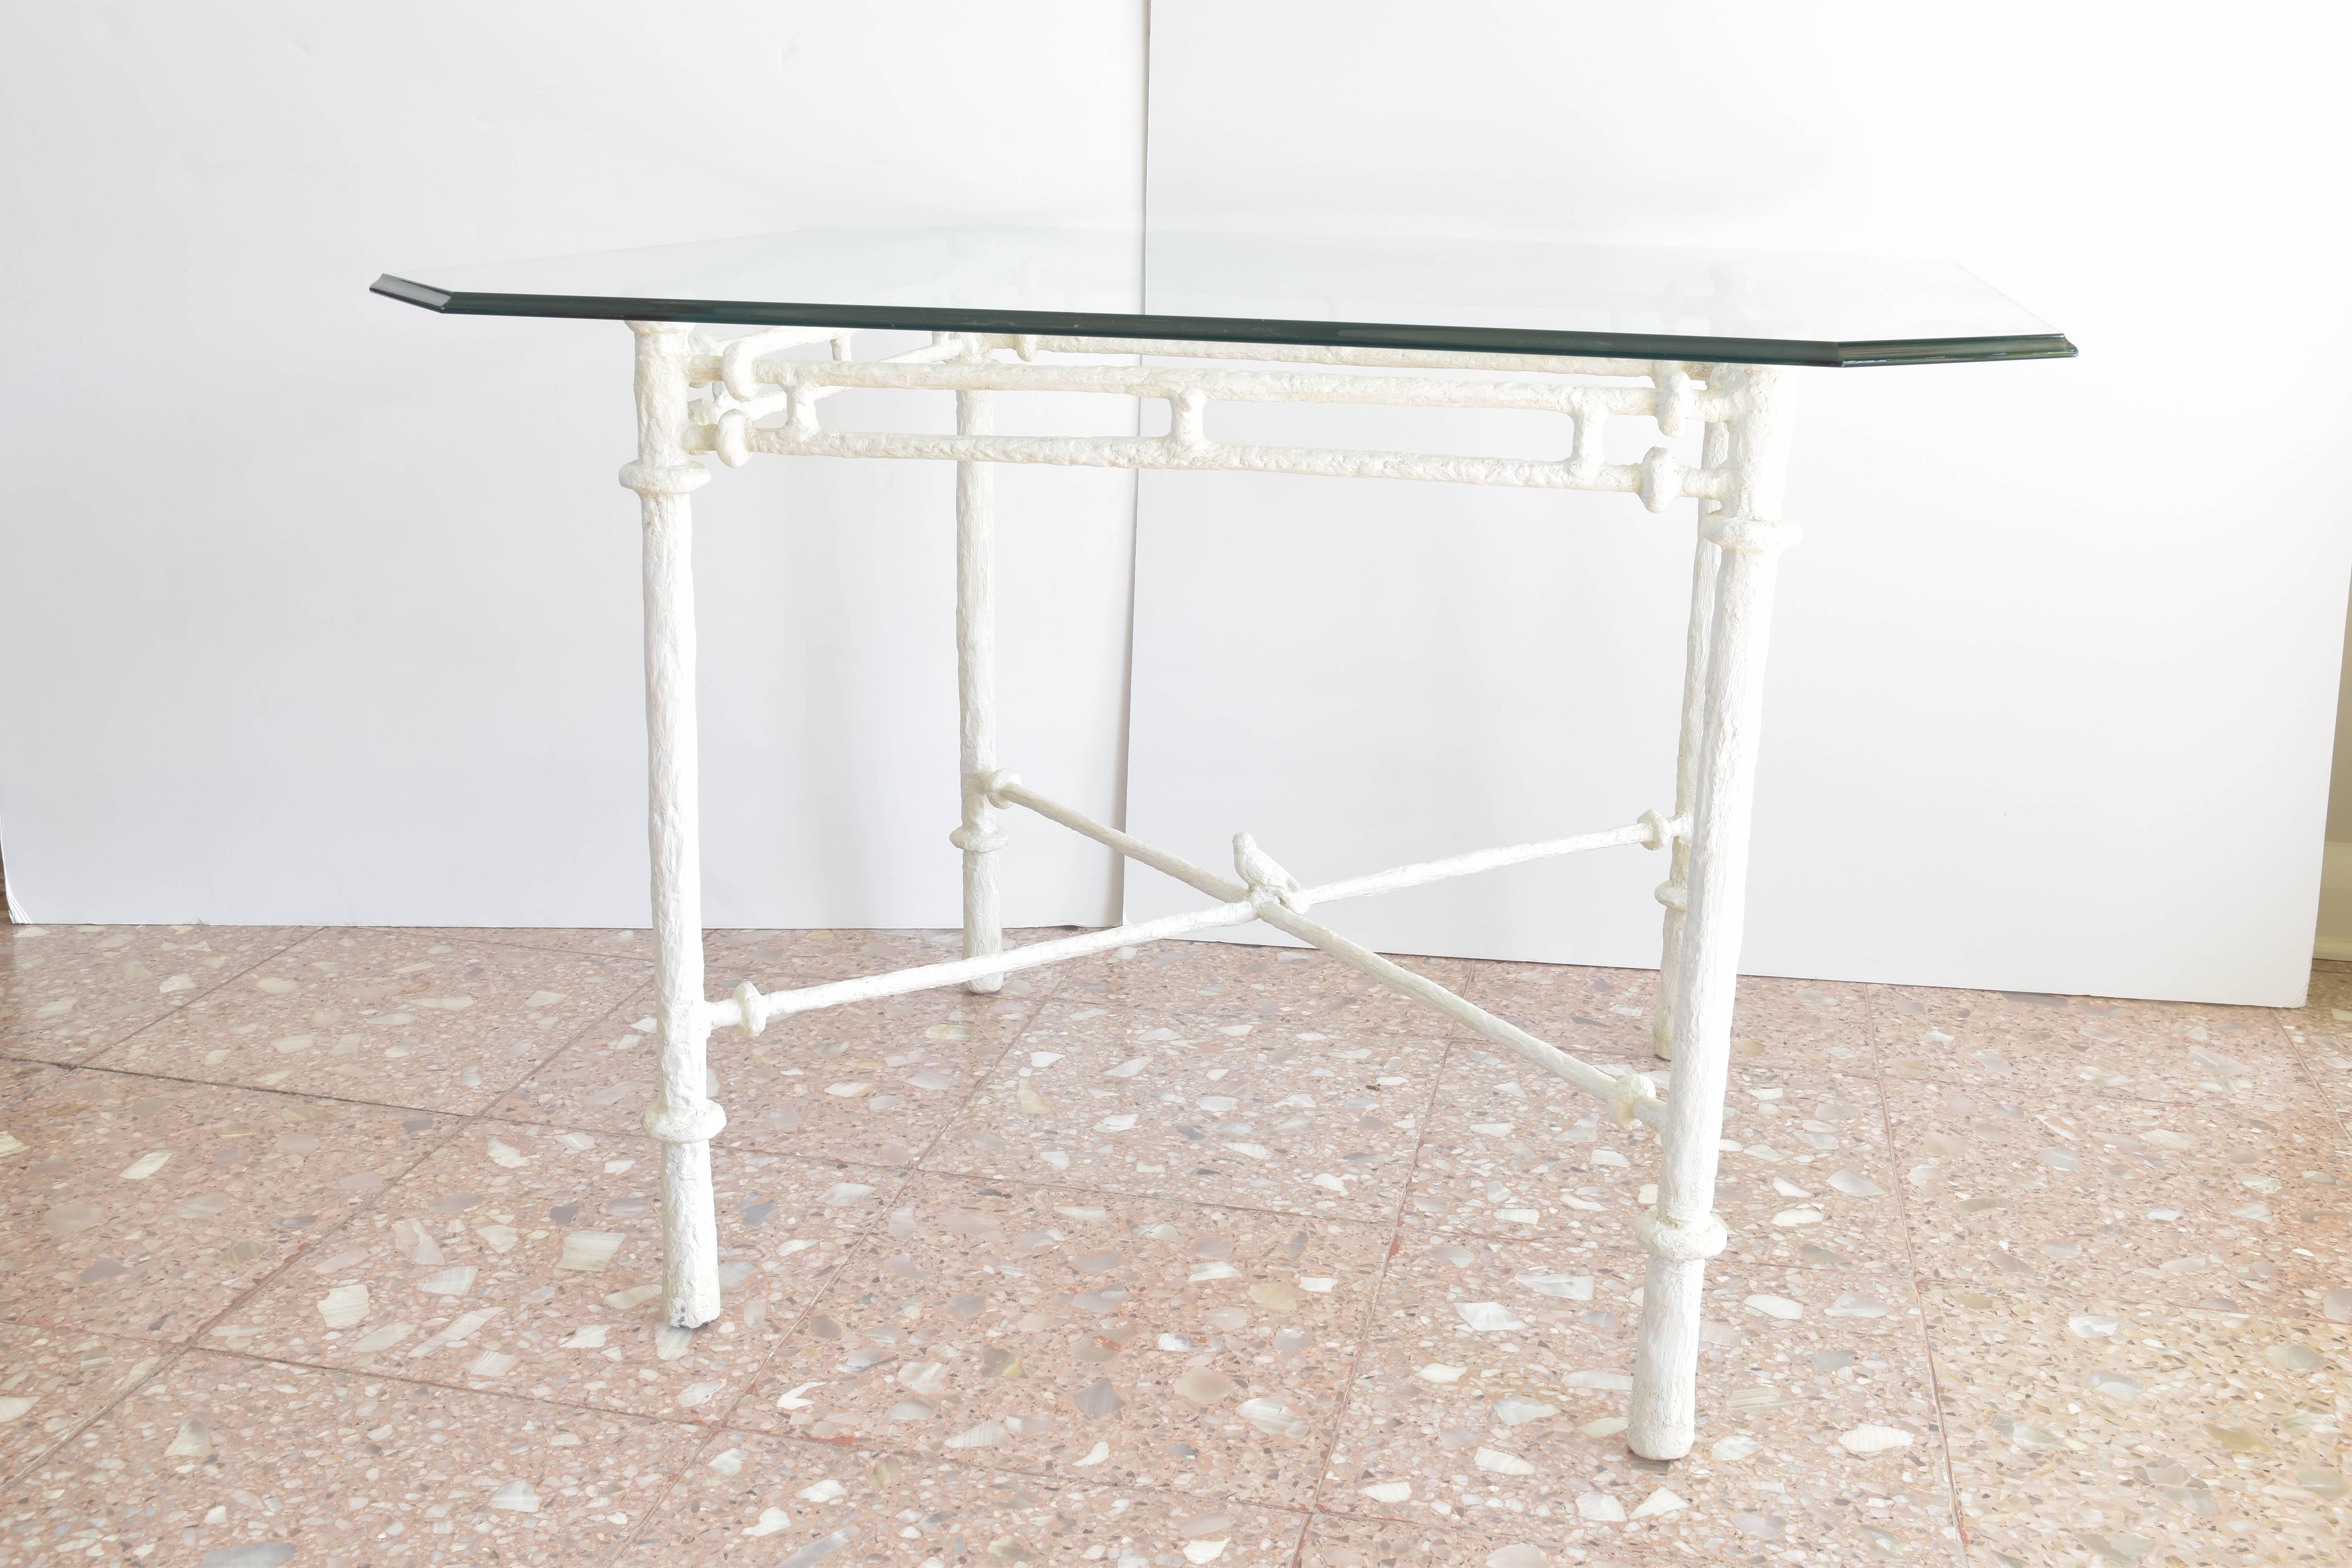 Giacometti glass top table cast in white plaster resin with a perched bird resting atop the x form base.   
Original glass top with beveled edge detail.

Table base measures 28.5